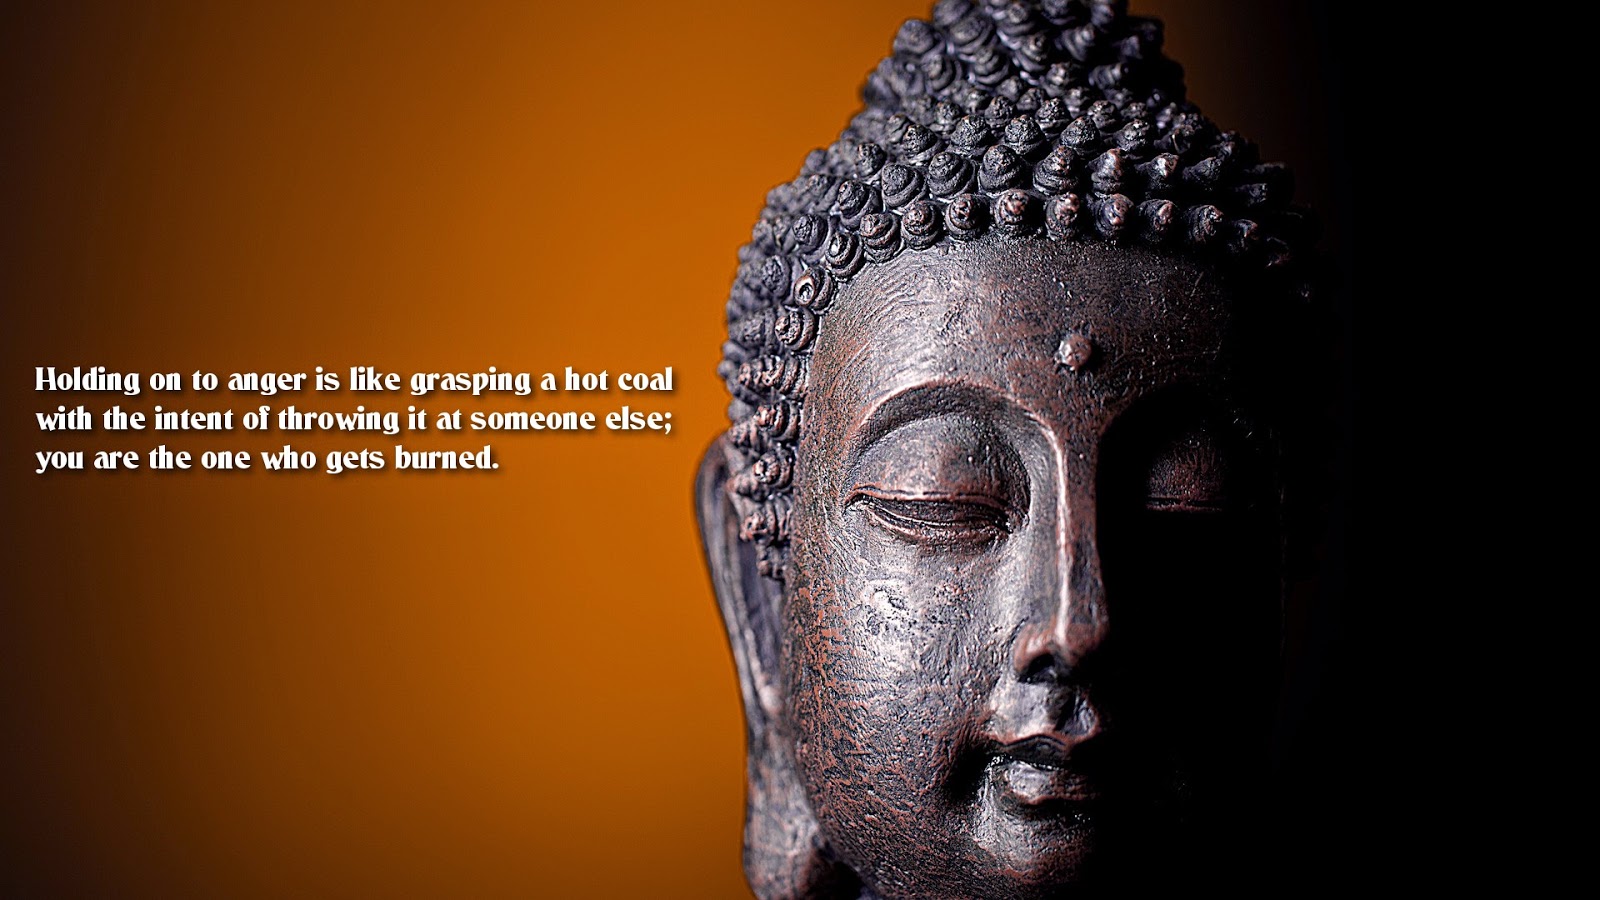 Buddha Wallpaper With Quotes On Life And Happiness HD Pictures For